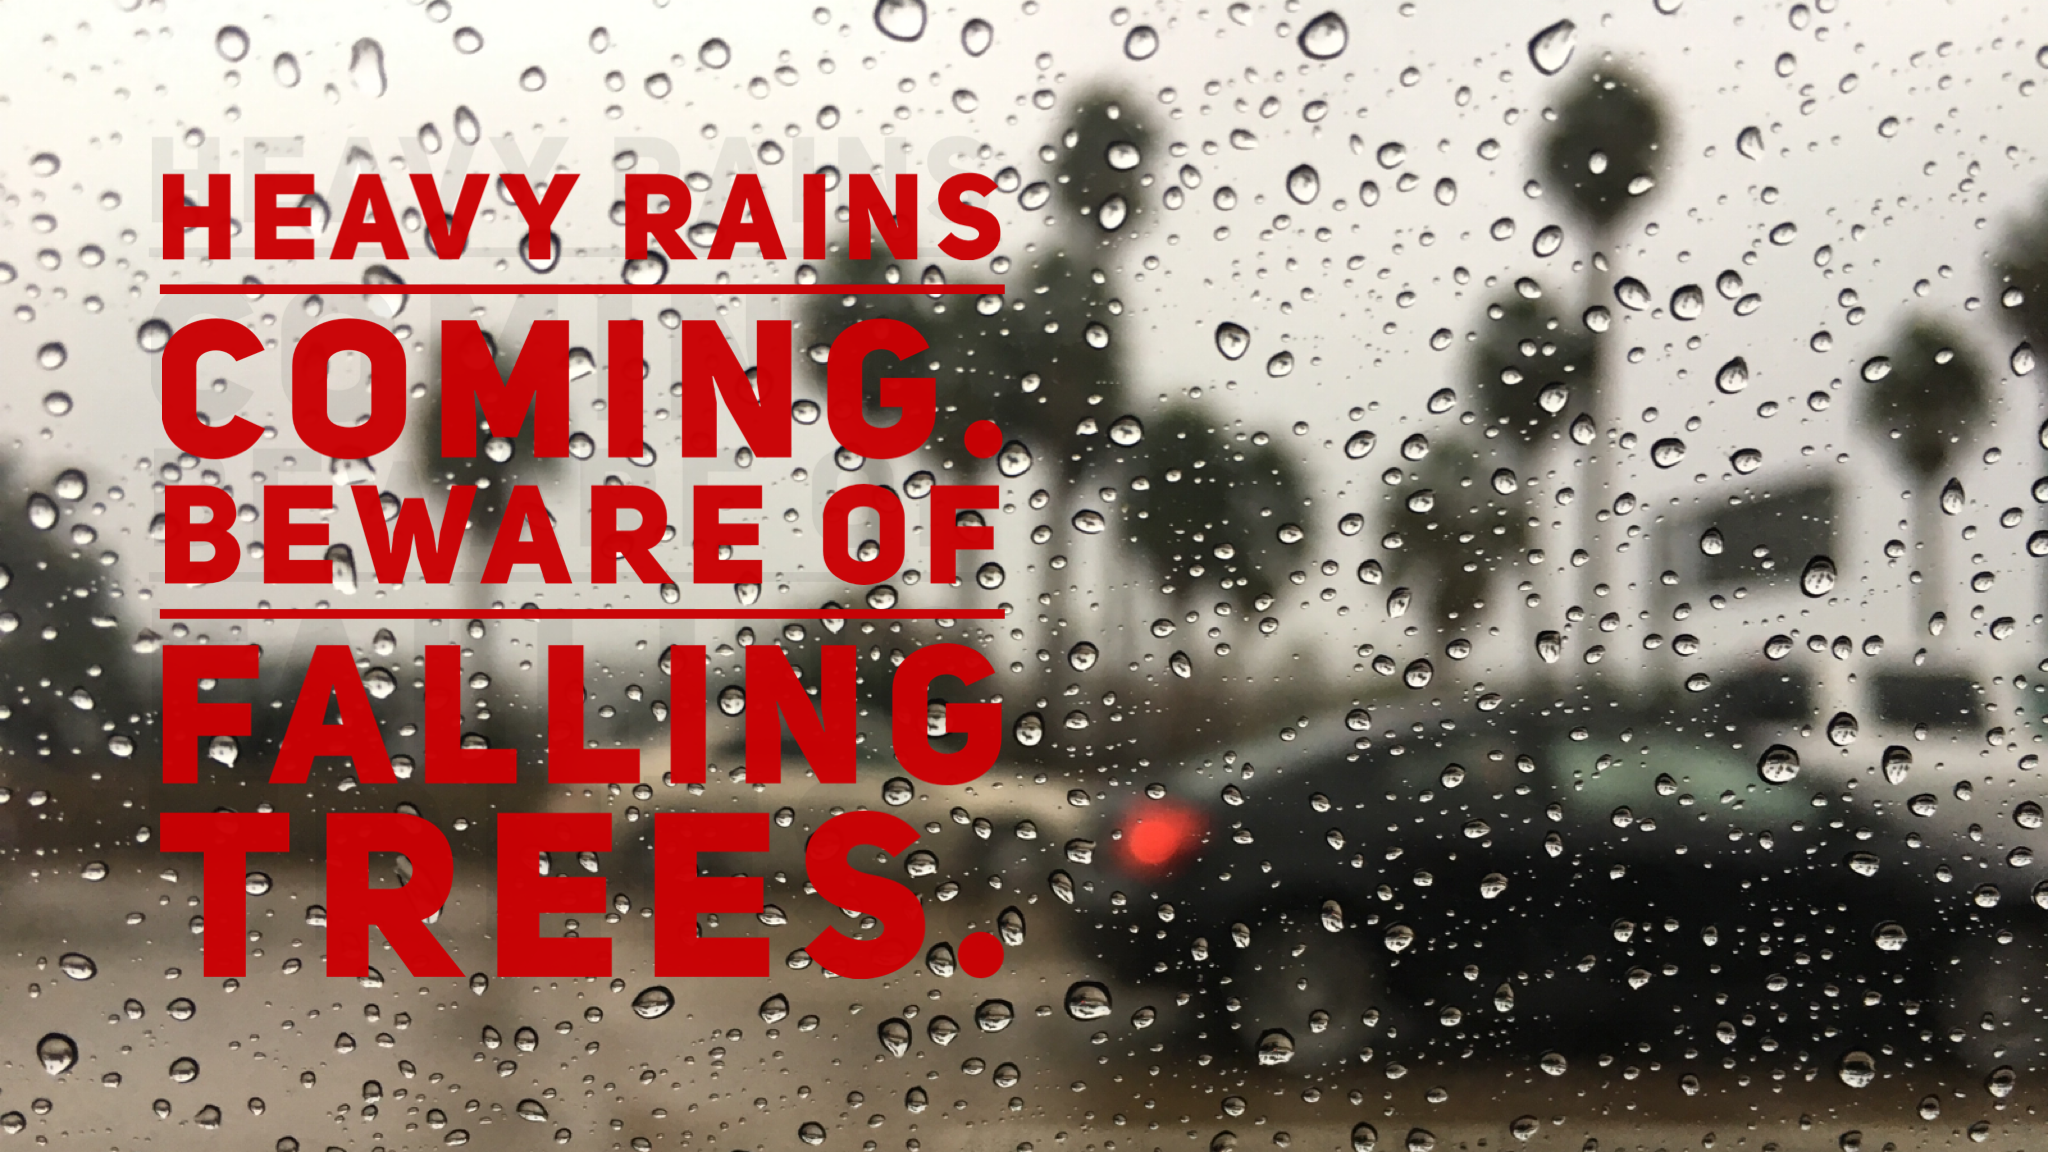 Rain falling on a street with car traffic and trees in the background